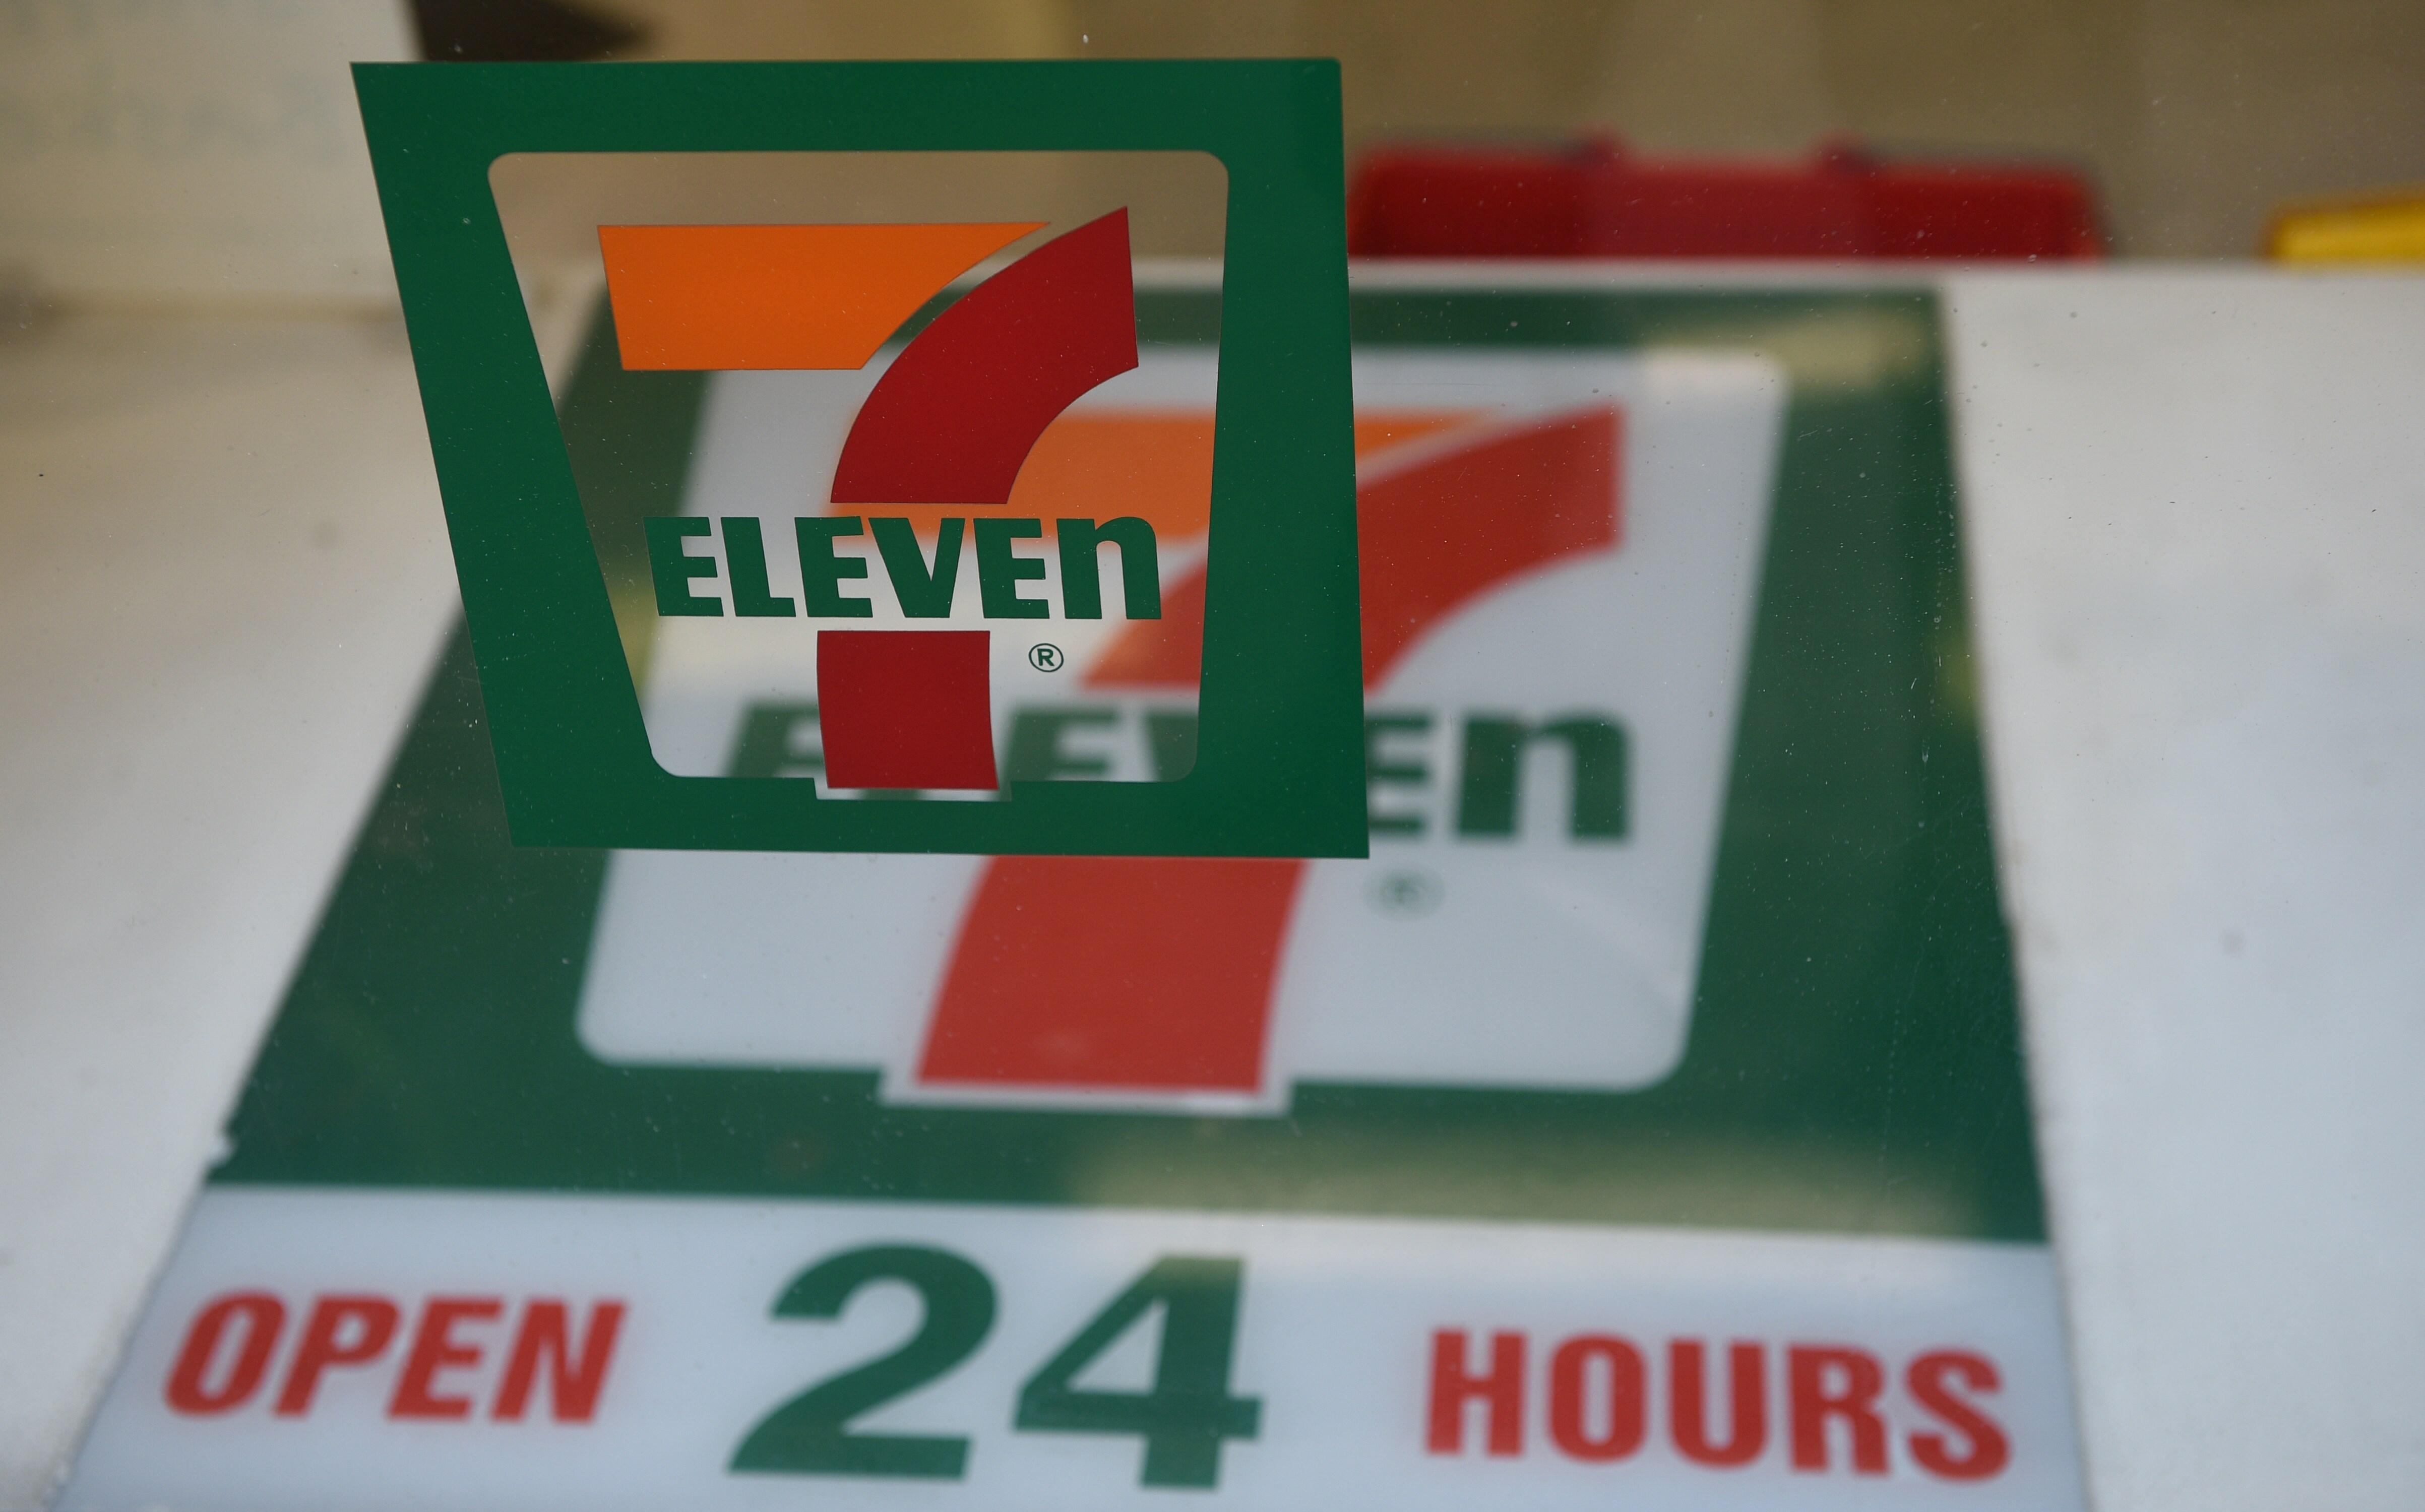 A sign for a 7-Eleven convenience store is seen at a store in Sydney on September 1, 2015. The convenience store giant will establish an independent panel to review damaging allegations that its franchisees doctored payrolls and systematically underpay wo